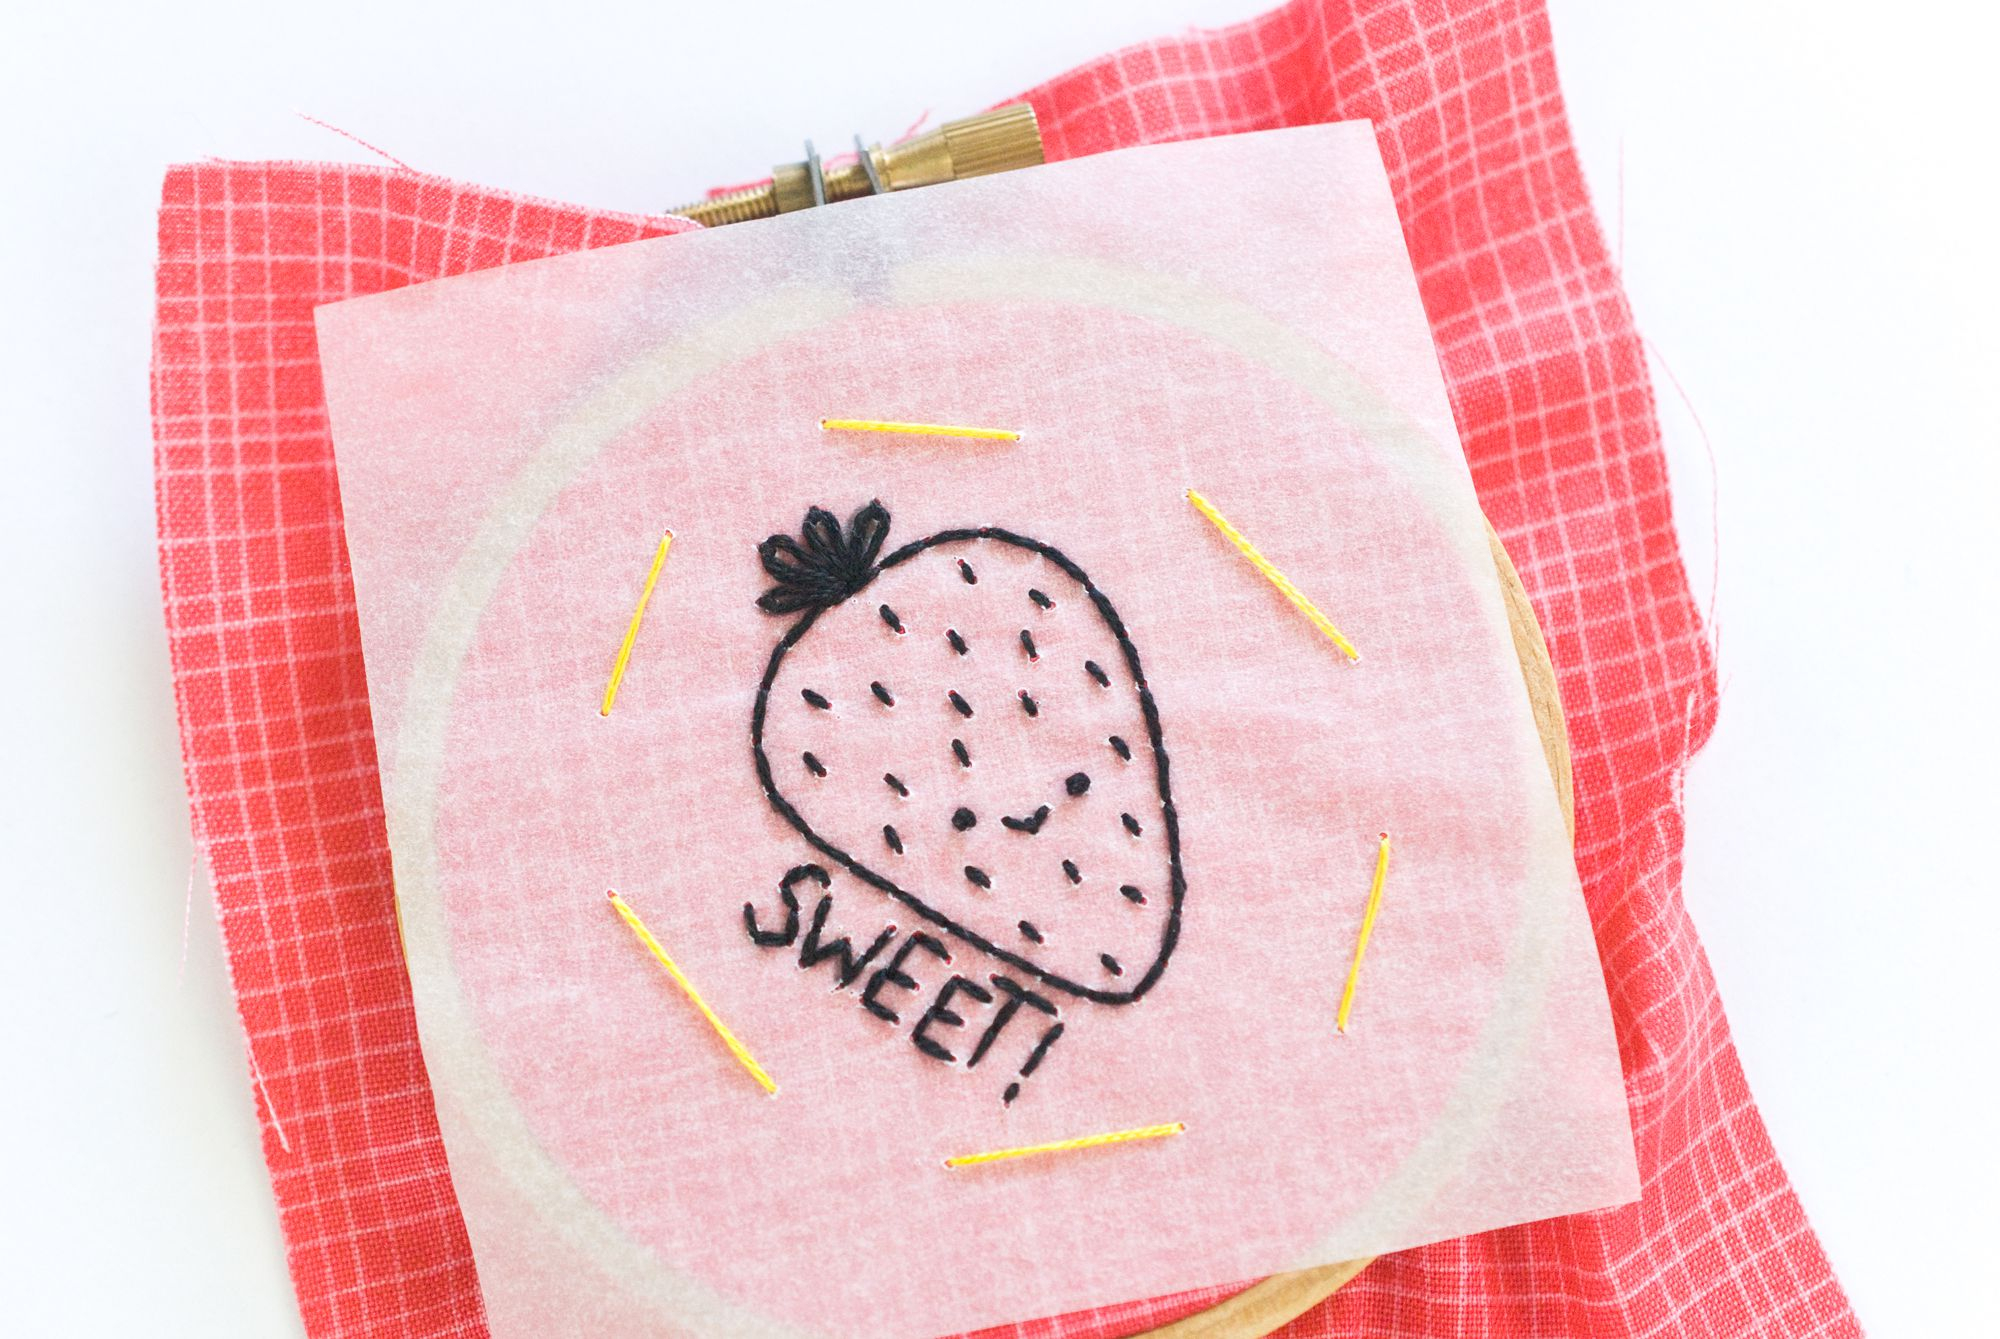 Paper Embroidery Patterns Using The Tracing Paper Embroidery Transfer Method